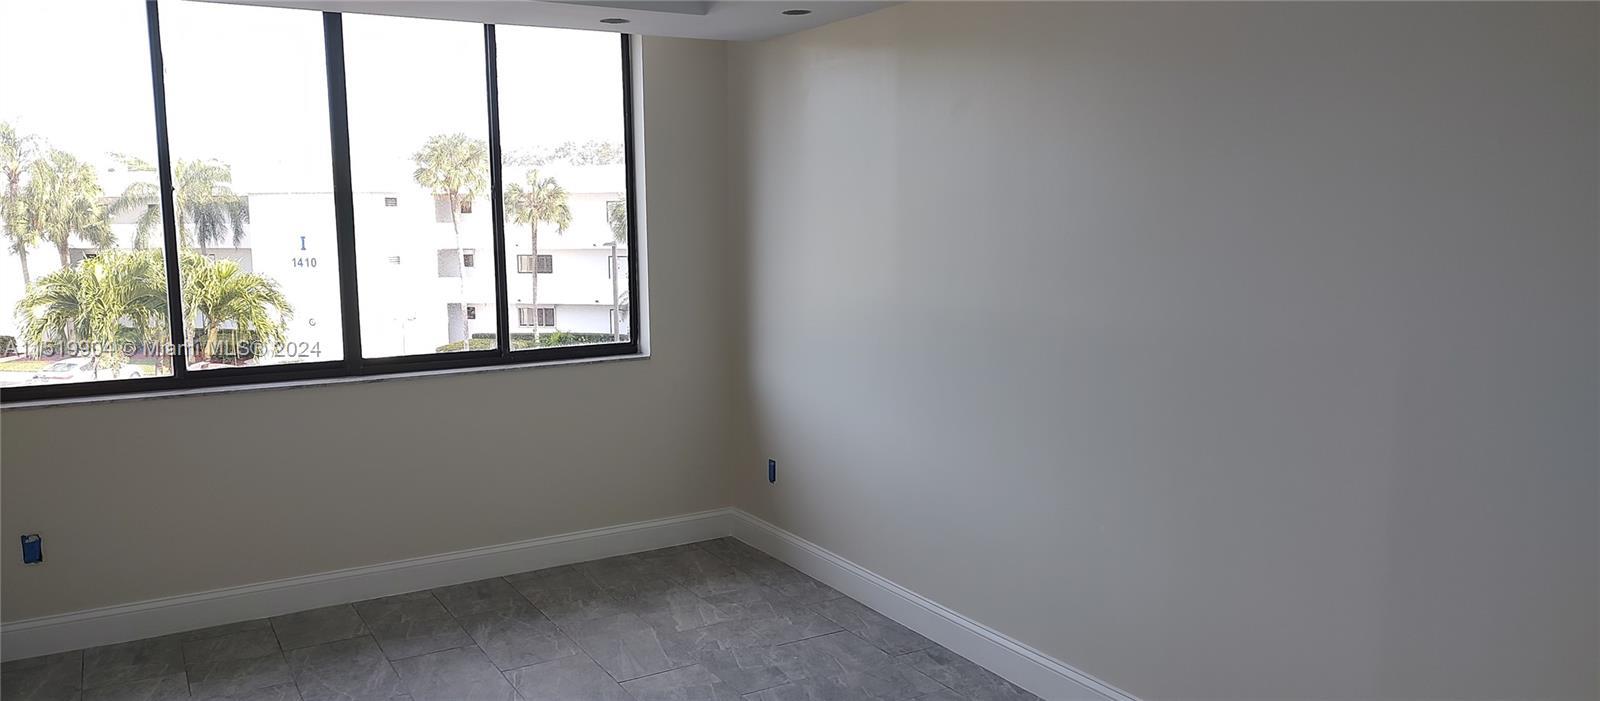 Photo of 1430 Sheridan St #27G in Hollywood, FL